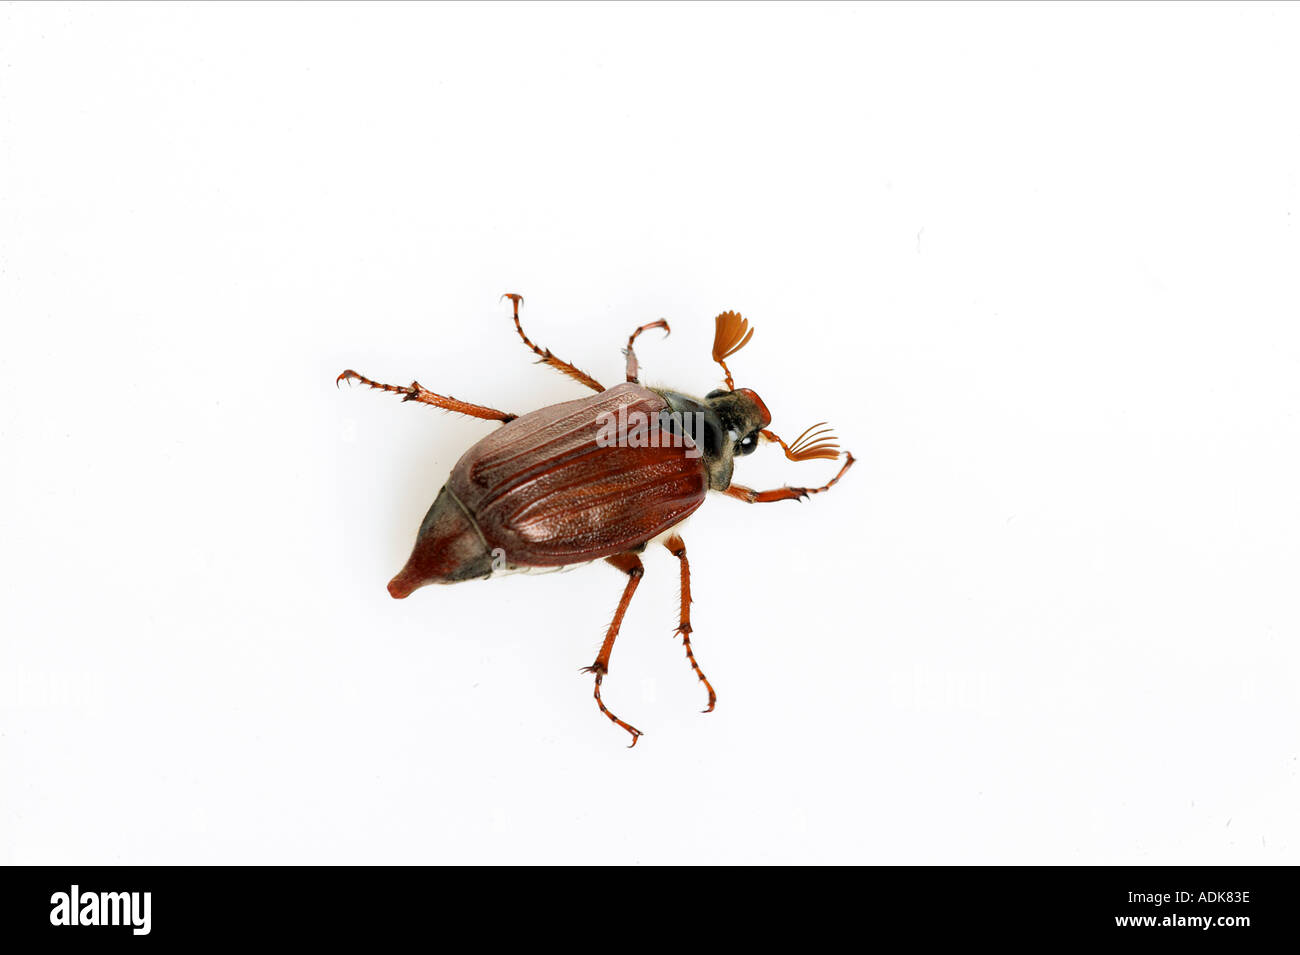 Common Cockchafer, Maybug (Melolontha melolontha). Beetle seen against a white background. Germany Stock Photo